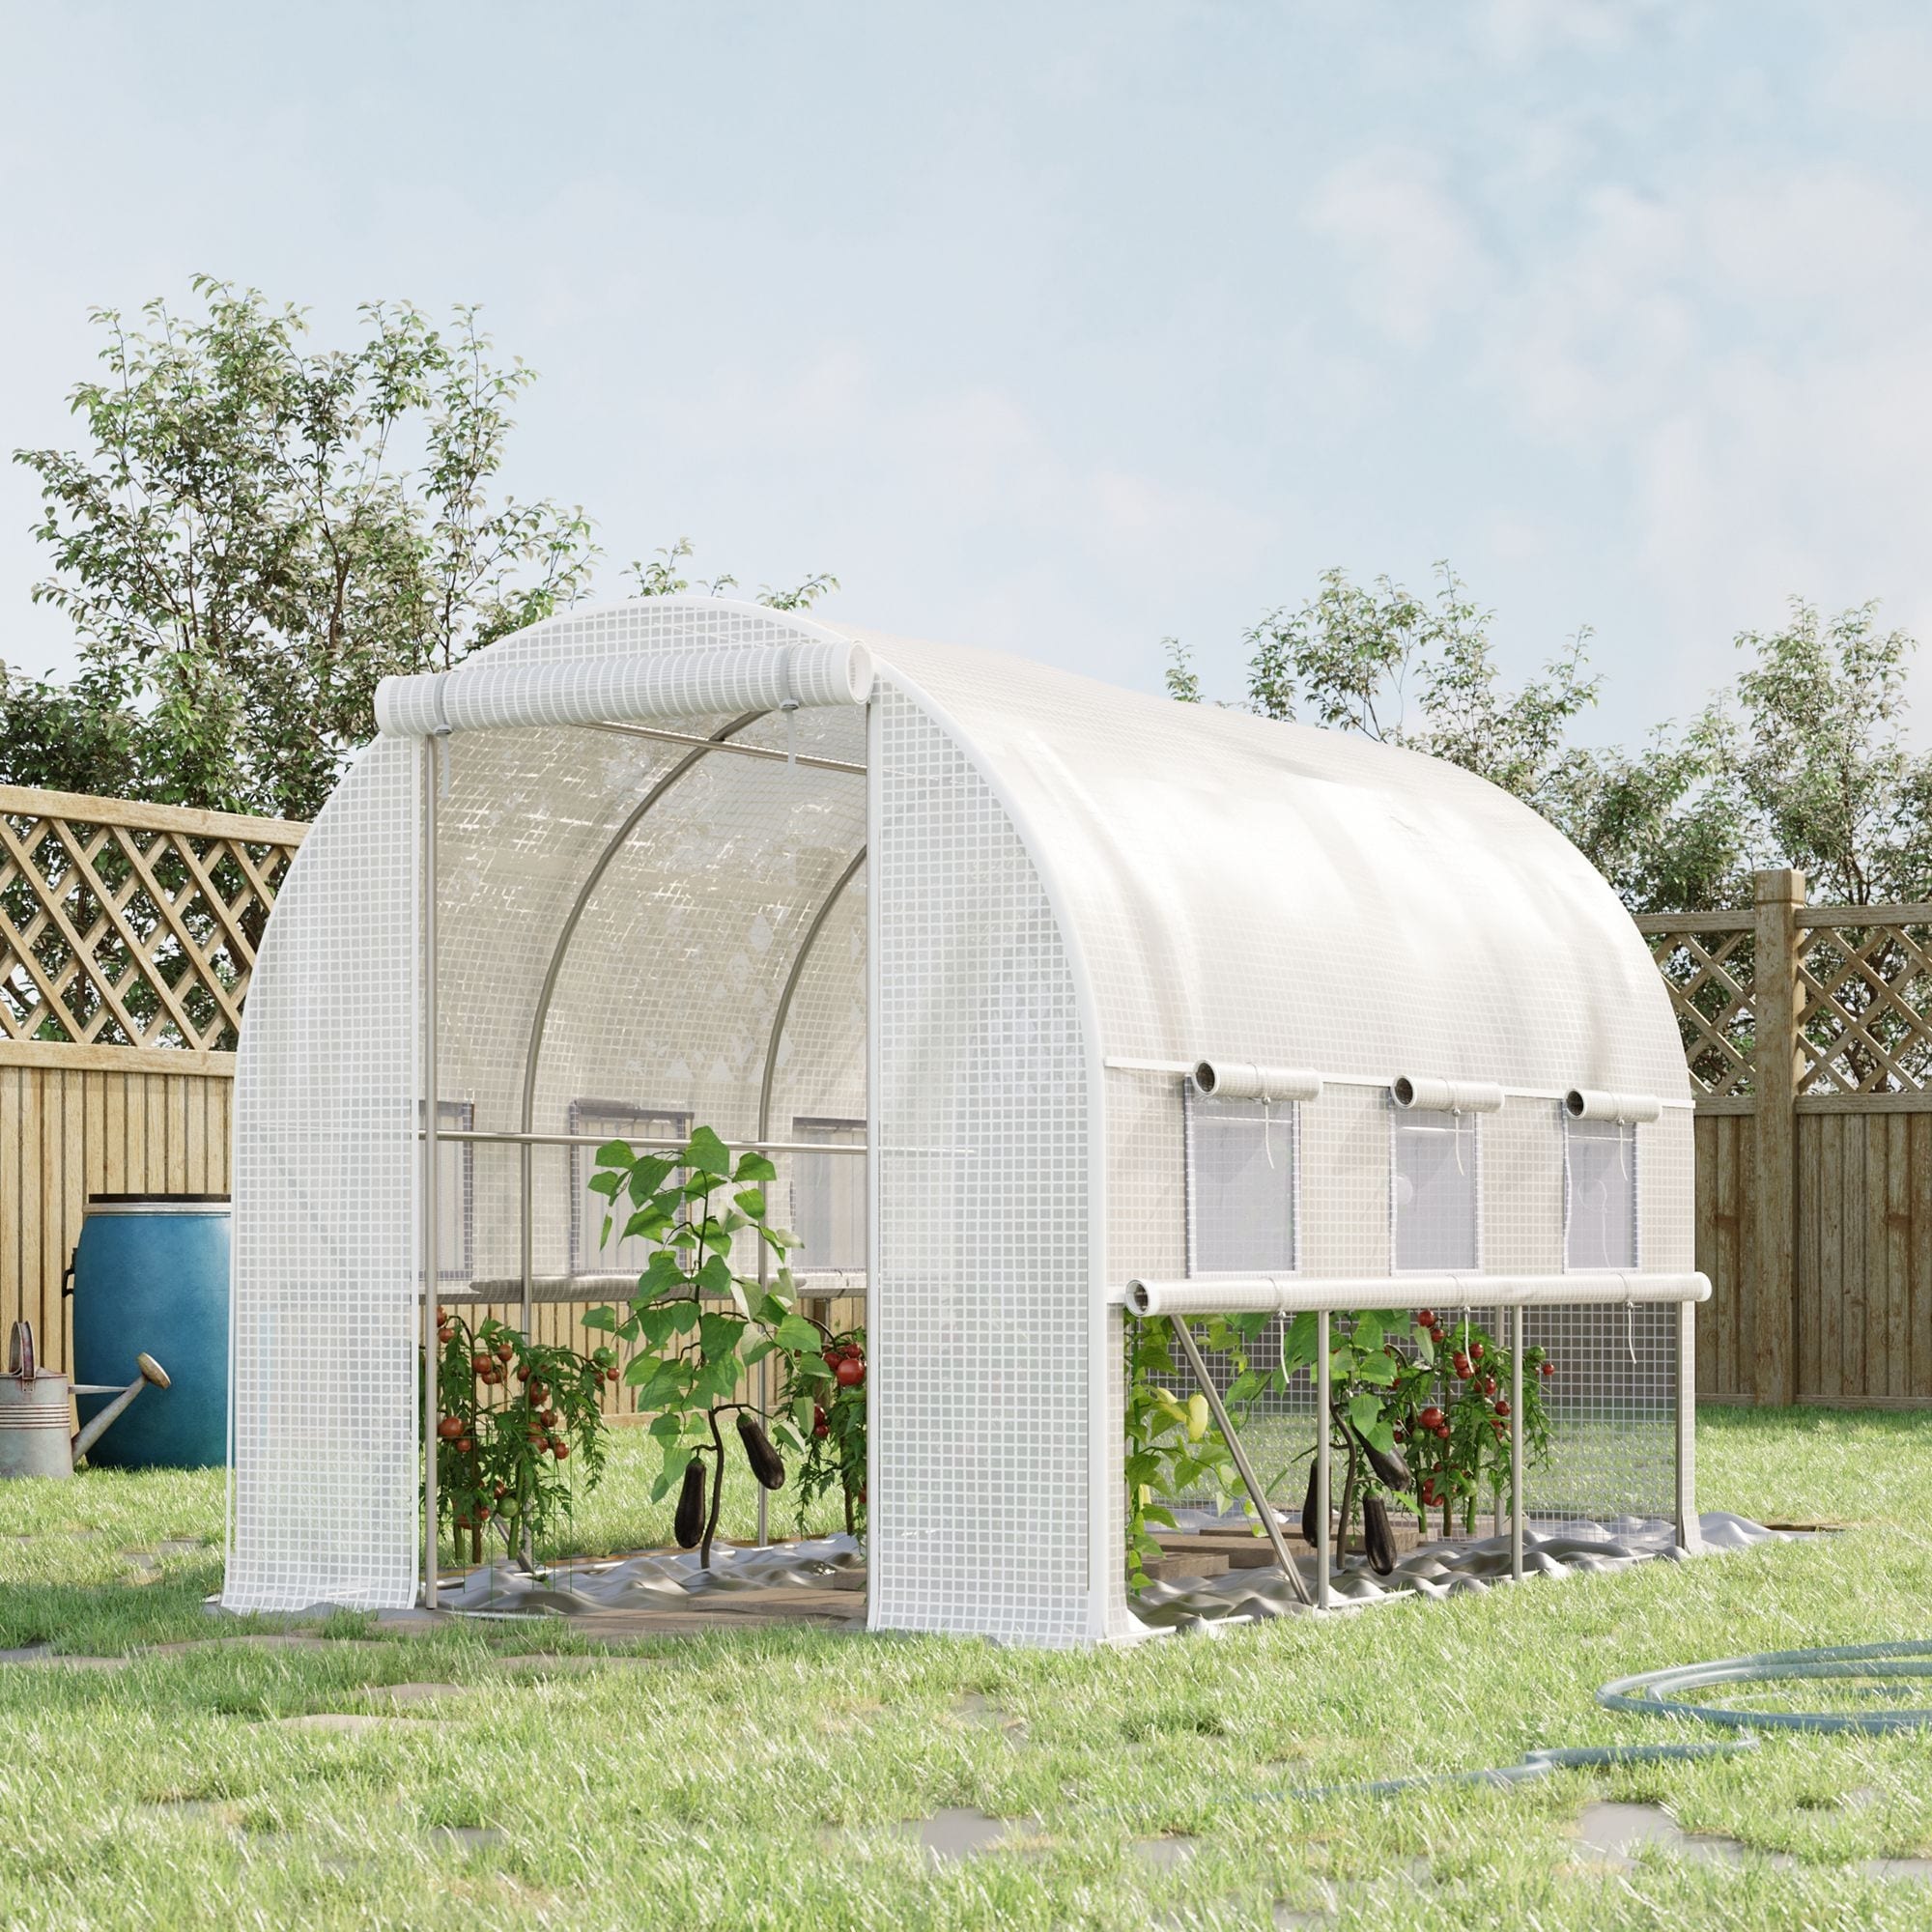 Outsunny 10' x 7' x 7' Walk-in Tunnel Greenhouse, Outdoor Plant Nursery  with Quality PE Cover, Zipper Doors White On Sale Bed Bath  Beyond  35471351